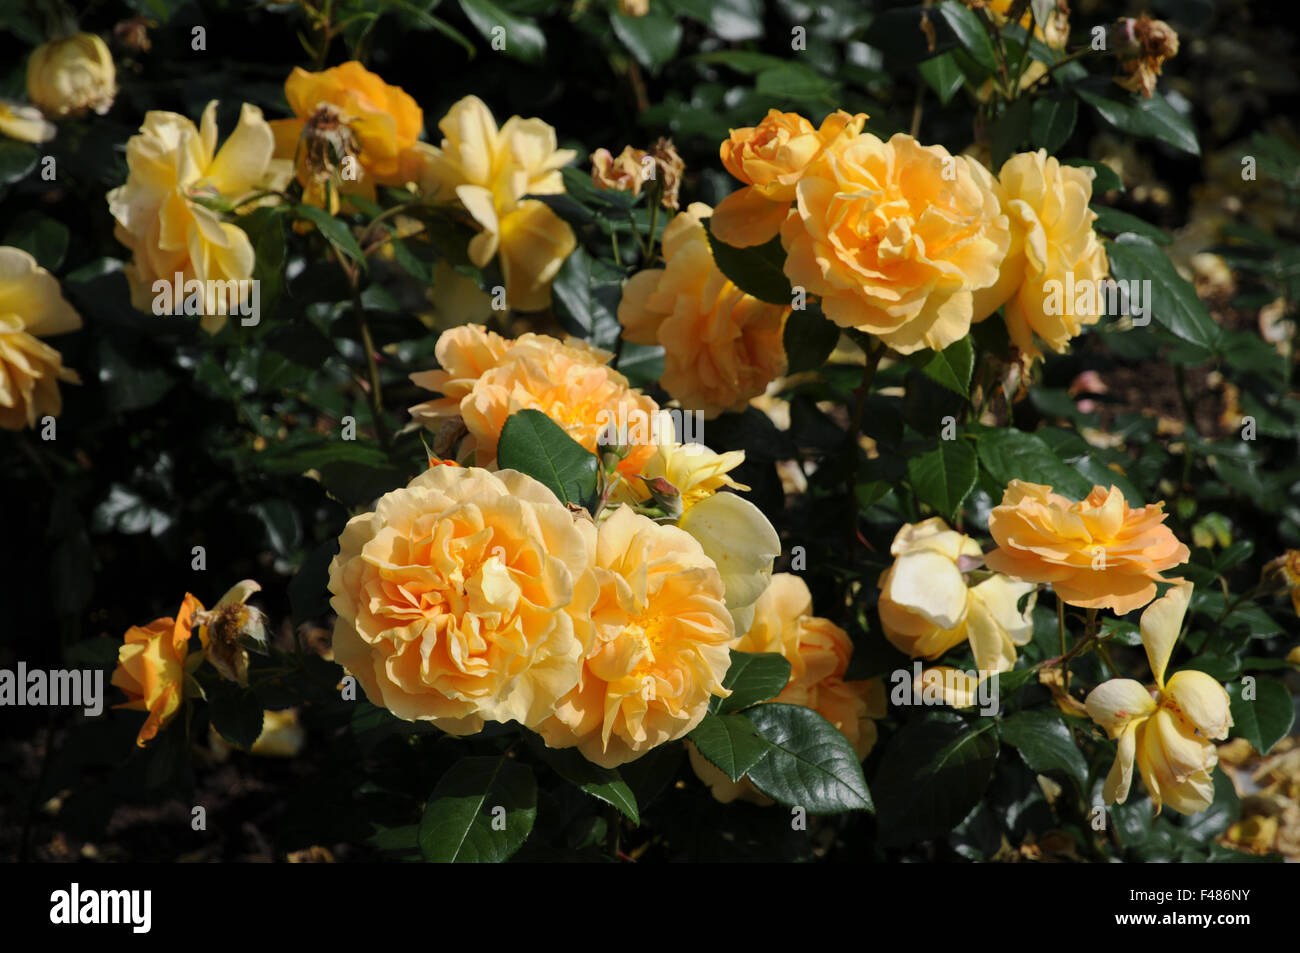 Bernstein Rose High Resolution Stock Photography and Images - Alamy